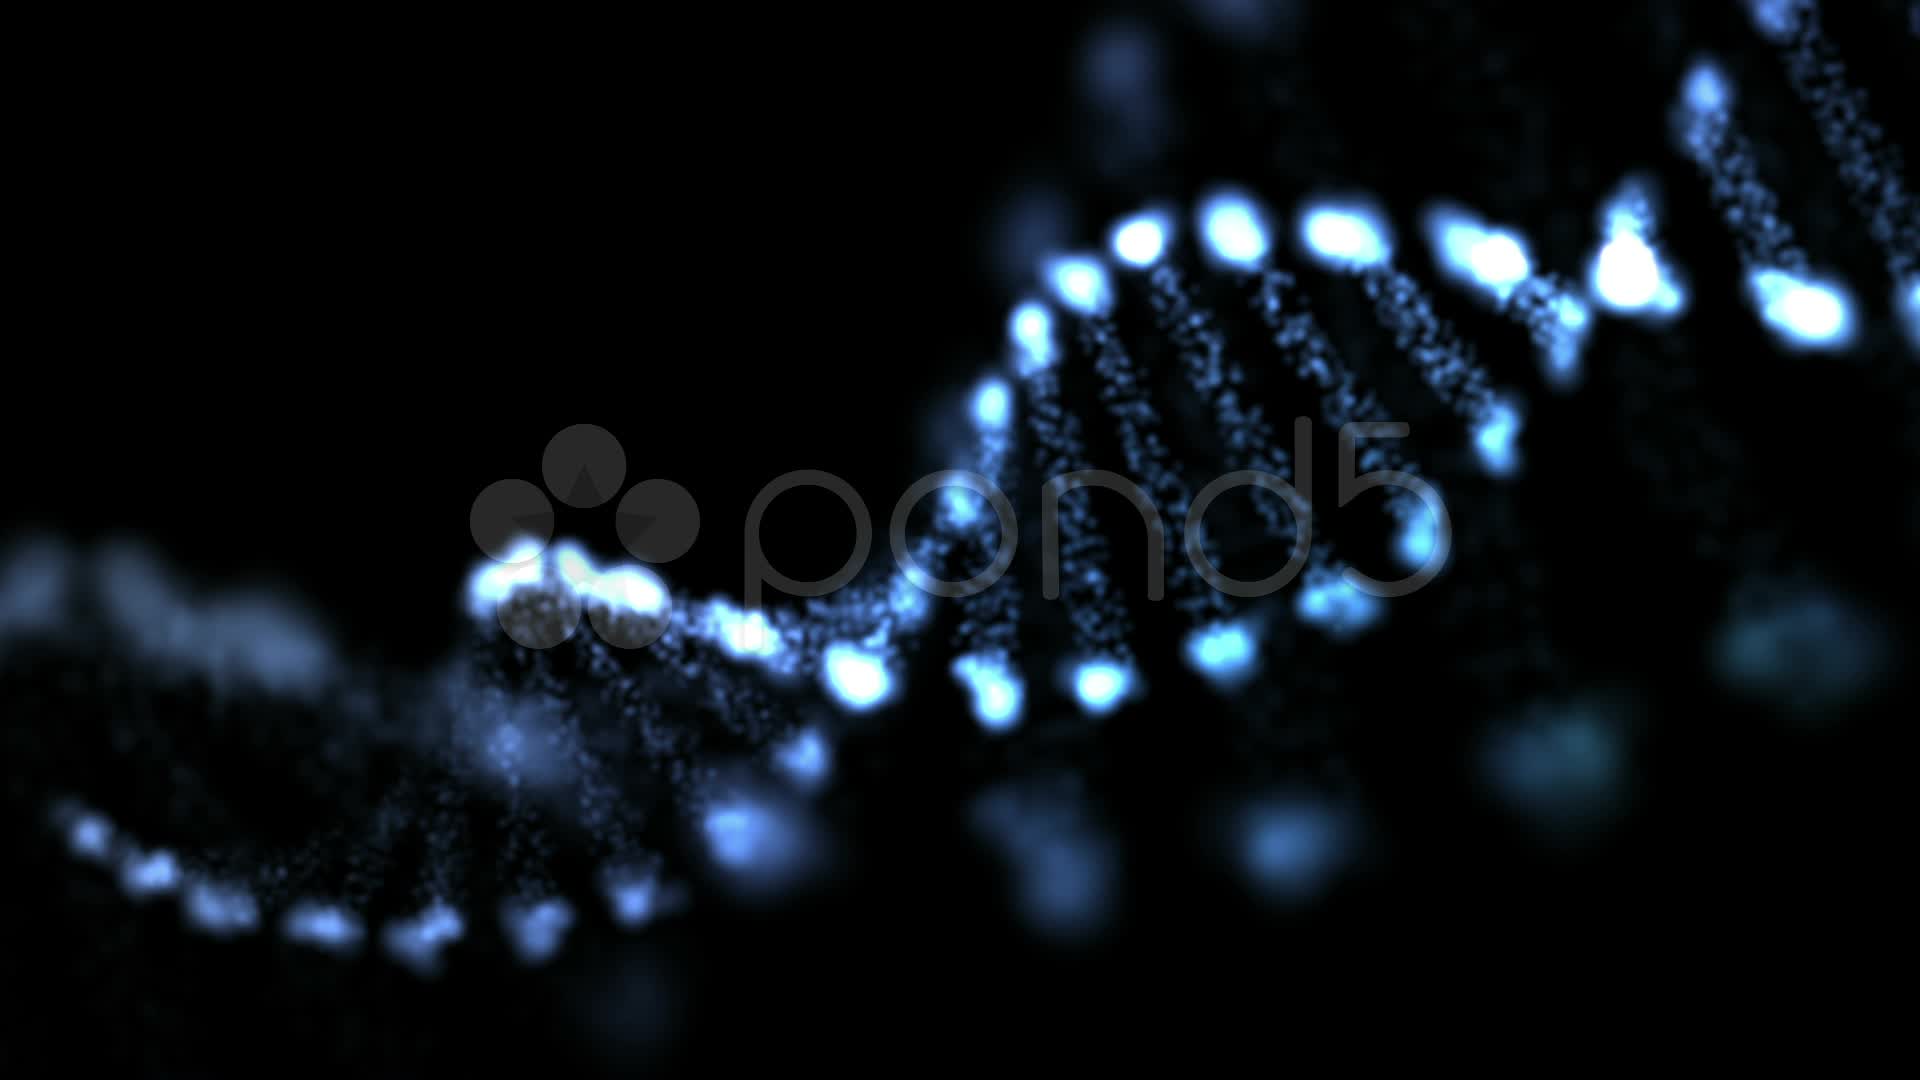 Free Download Dna Wallpaper 1080p Animated Abstract Dna Hd Images, Photos, Reviews